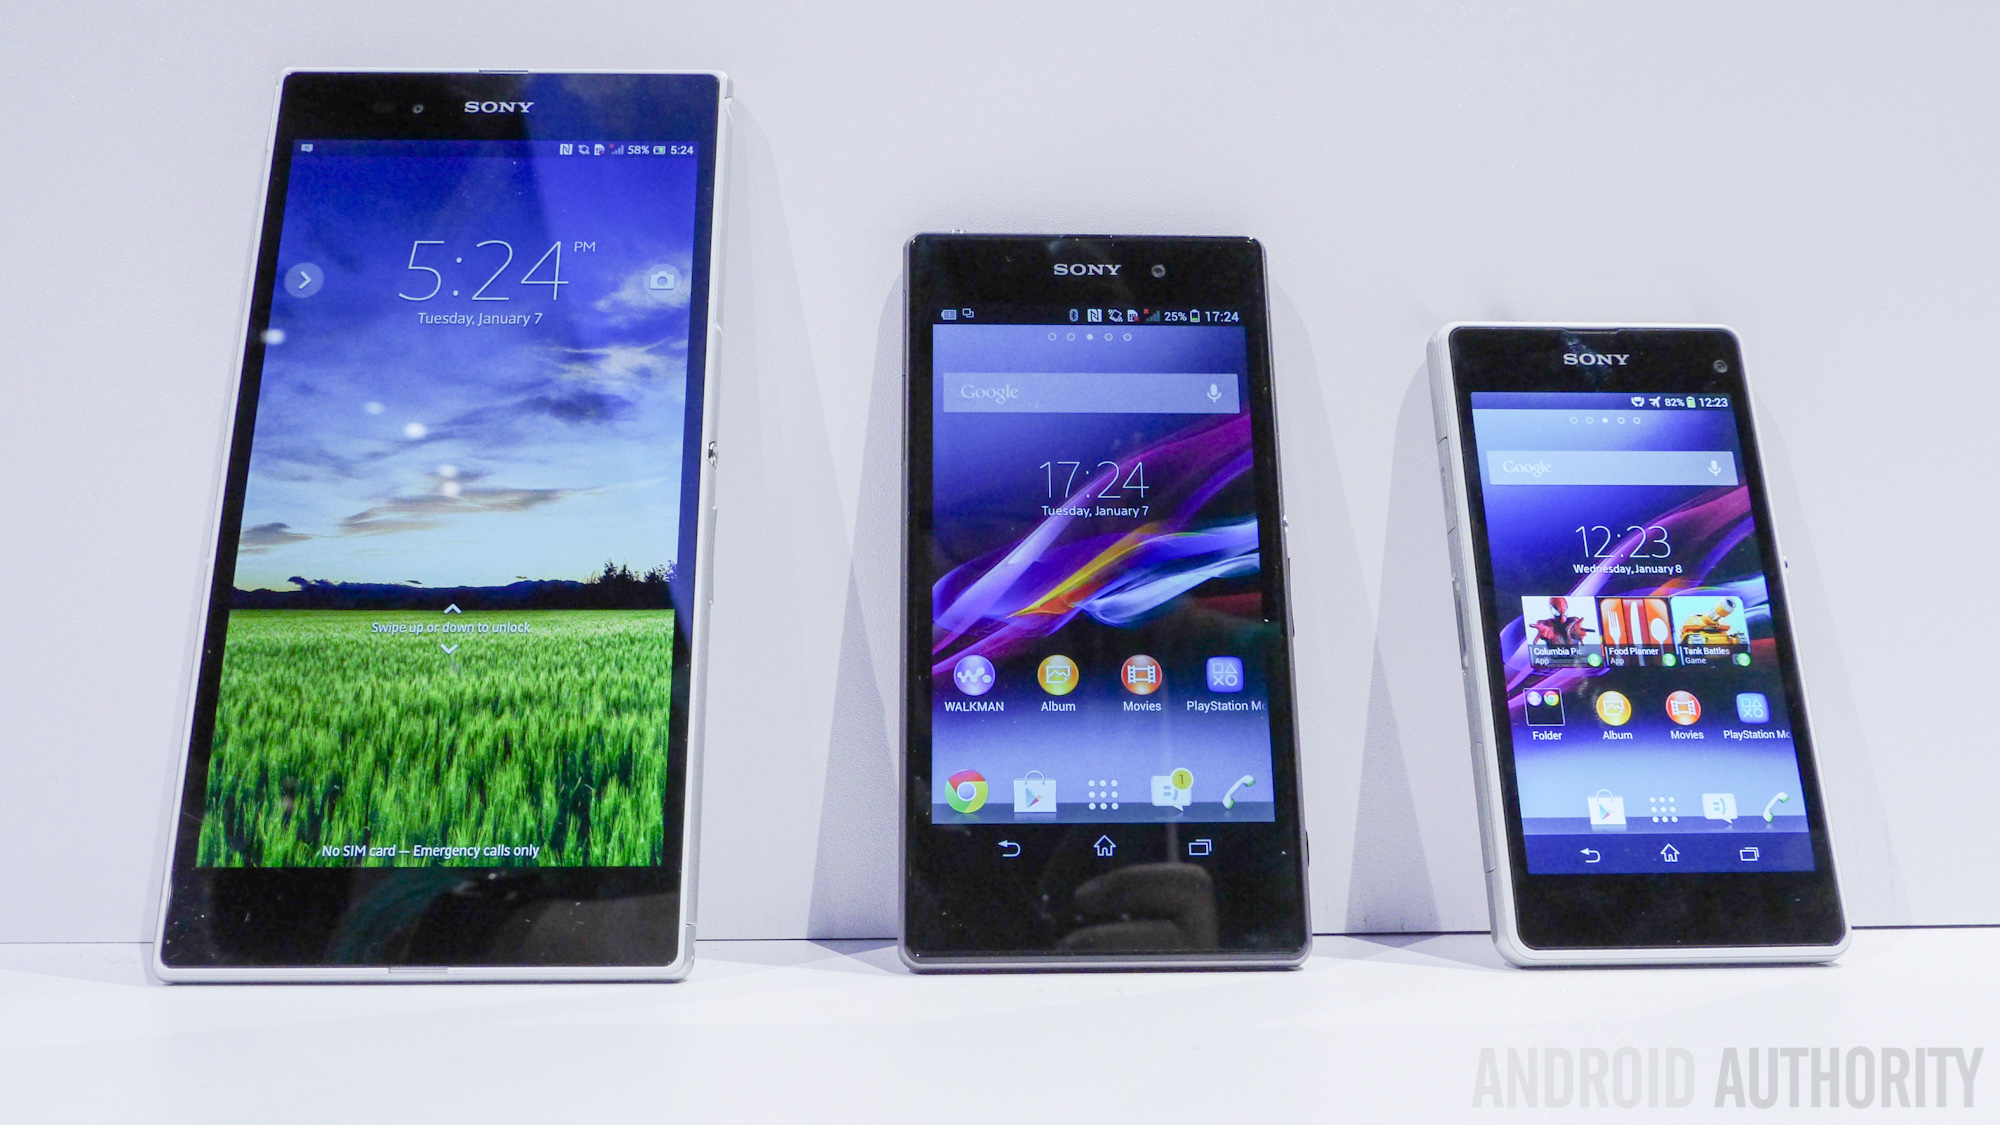 Sony Xperia Z1 Compact Review - Android Authority